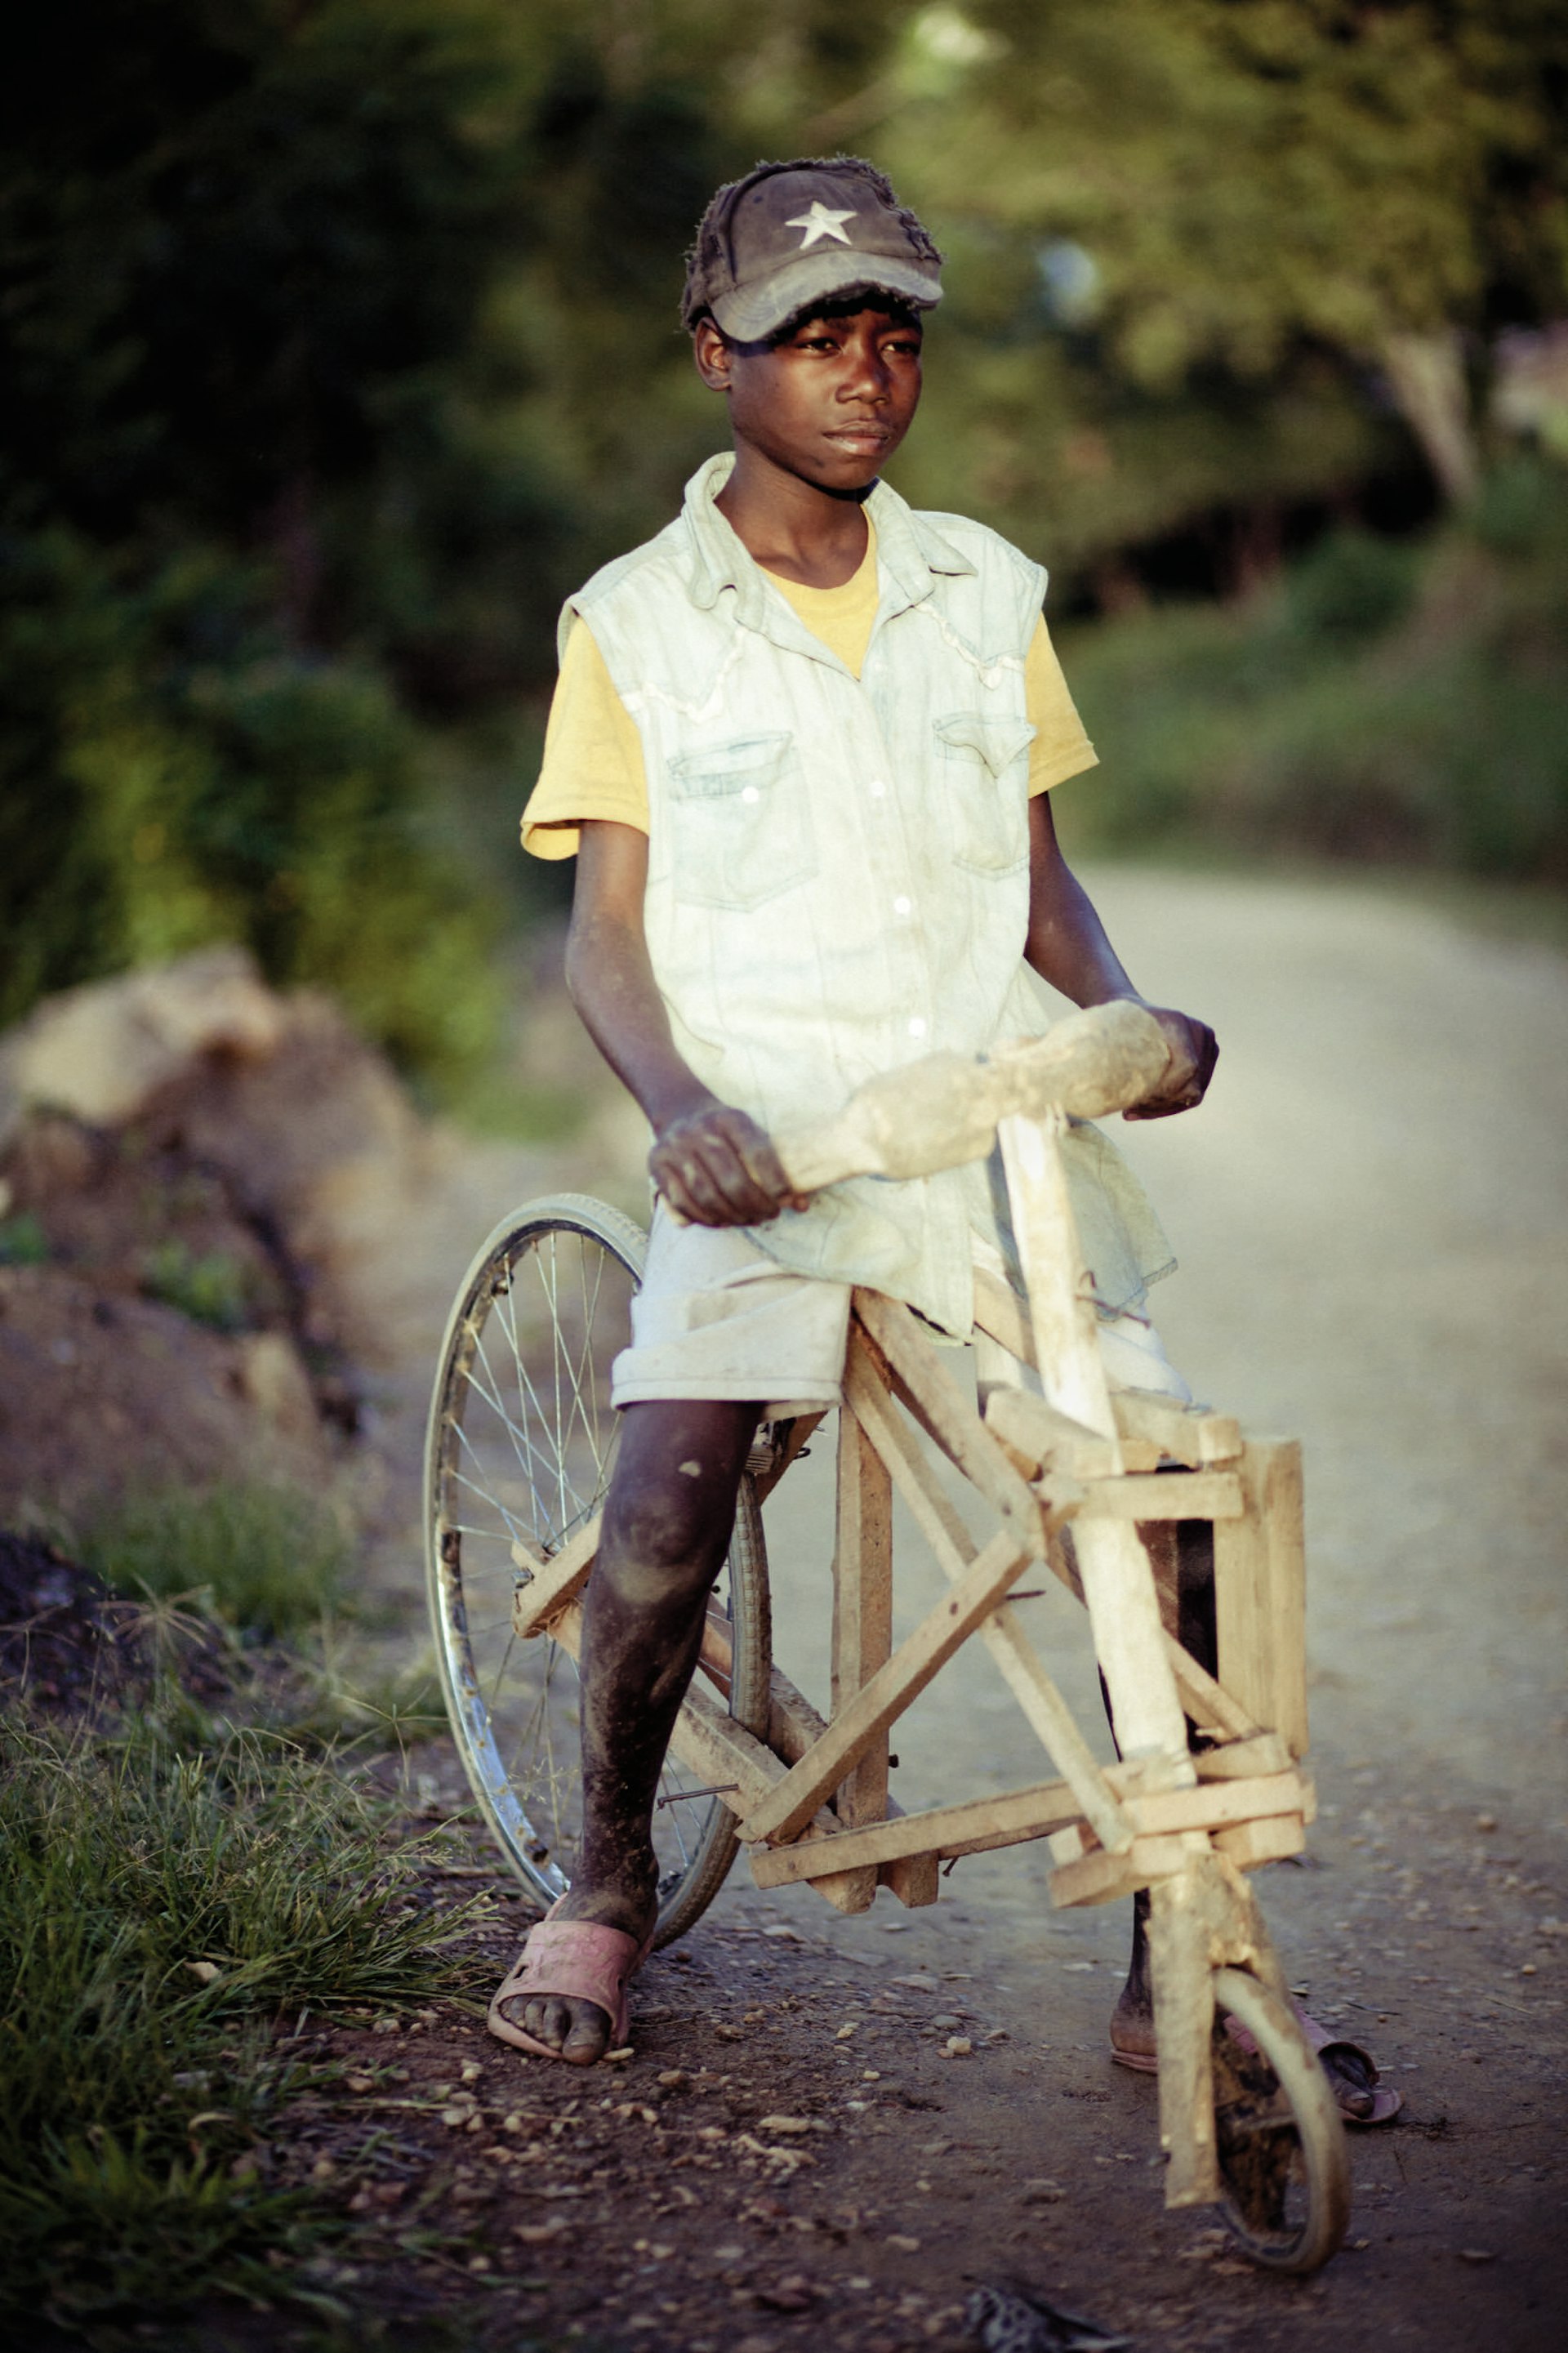 Rukundo Theogen, aged 12, who's home-made wooden bike was one month old